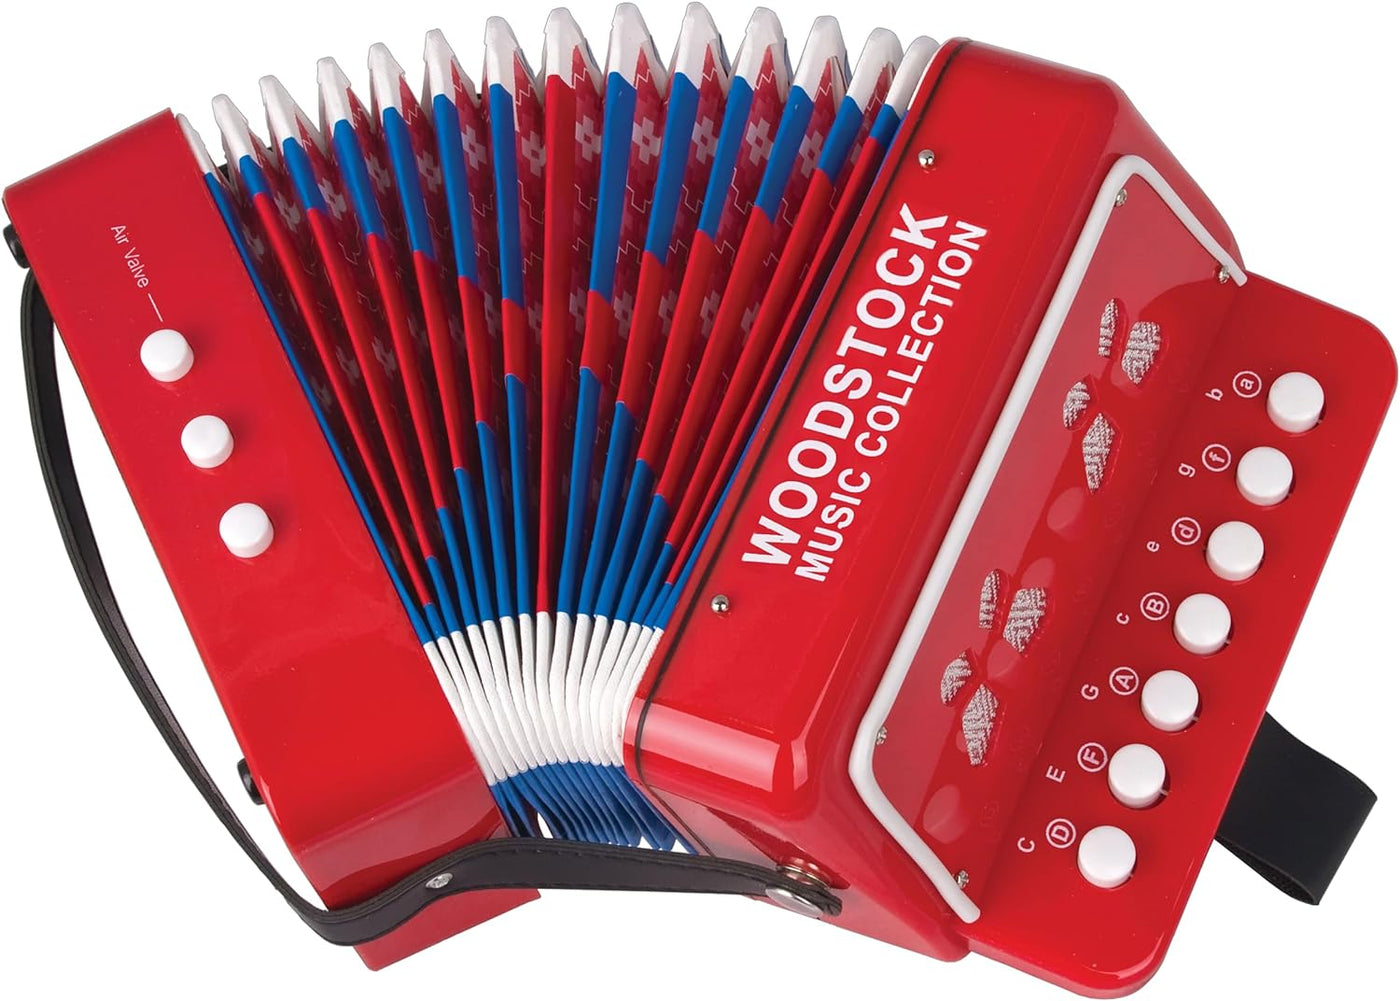 Kid's Accordion (7") with 10 Keys/Buttons